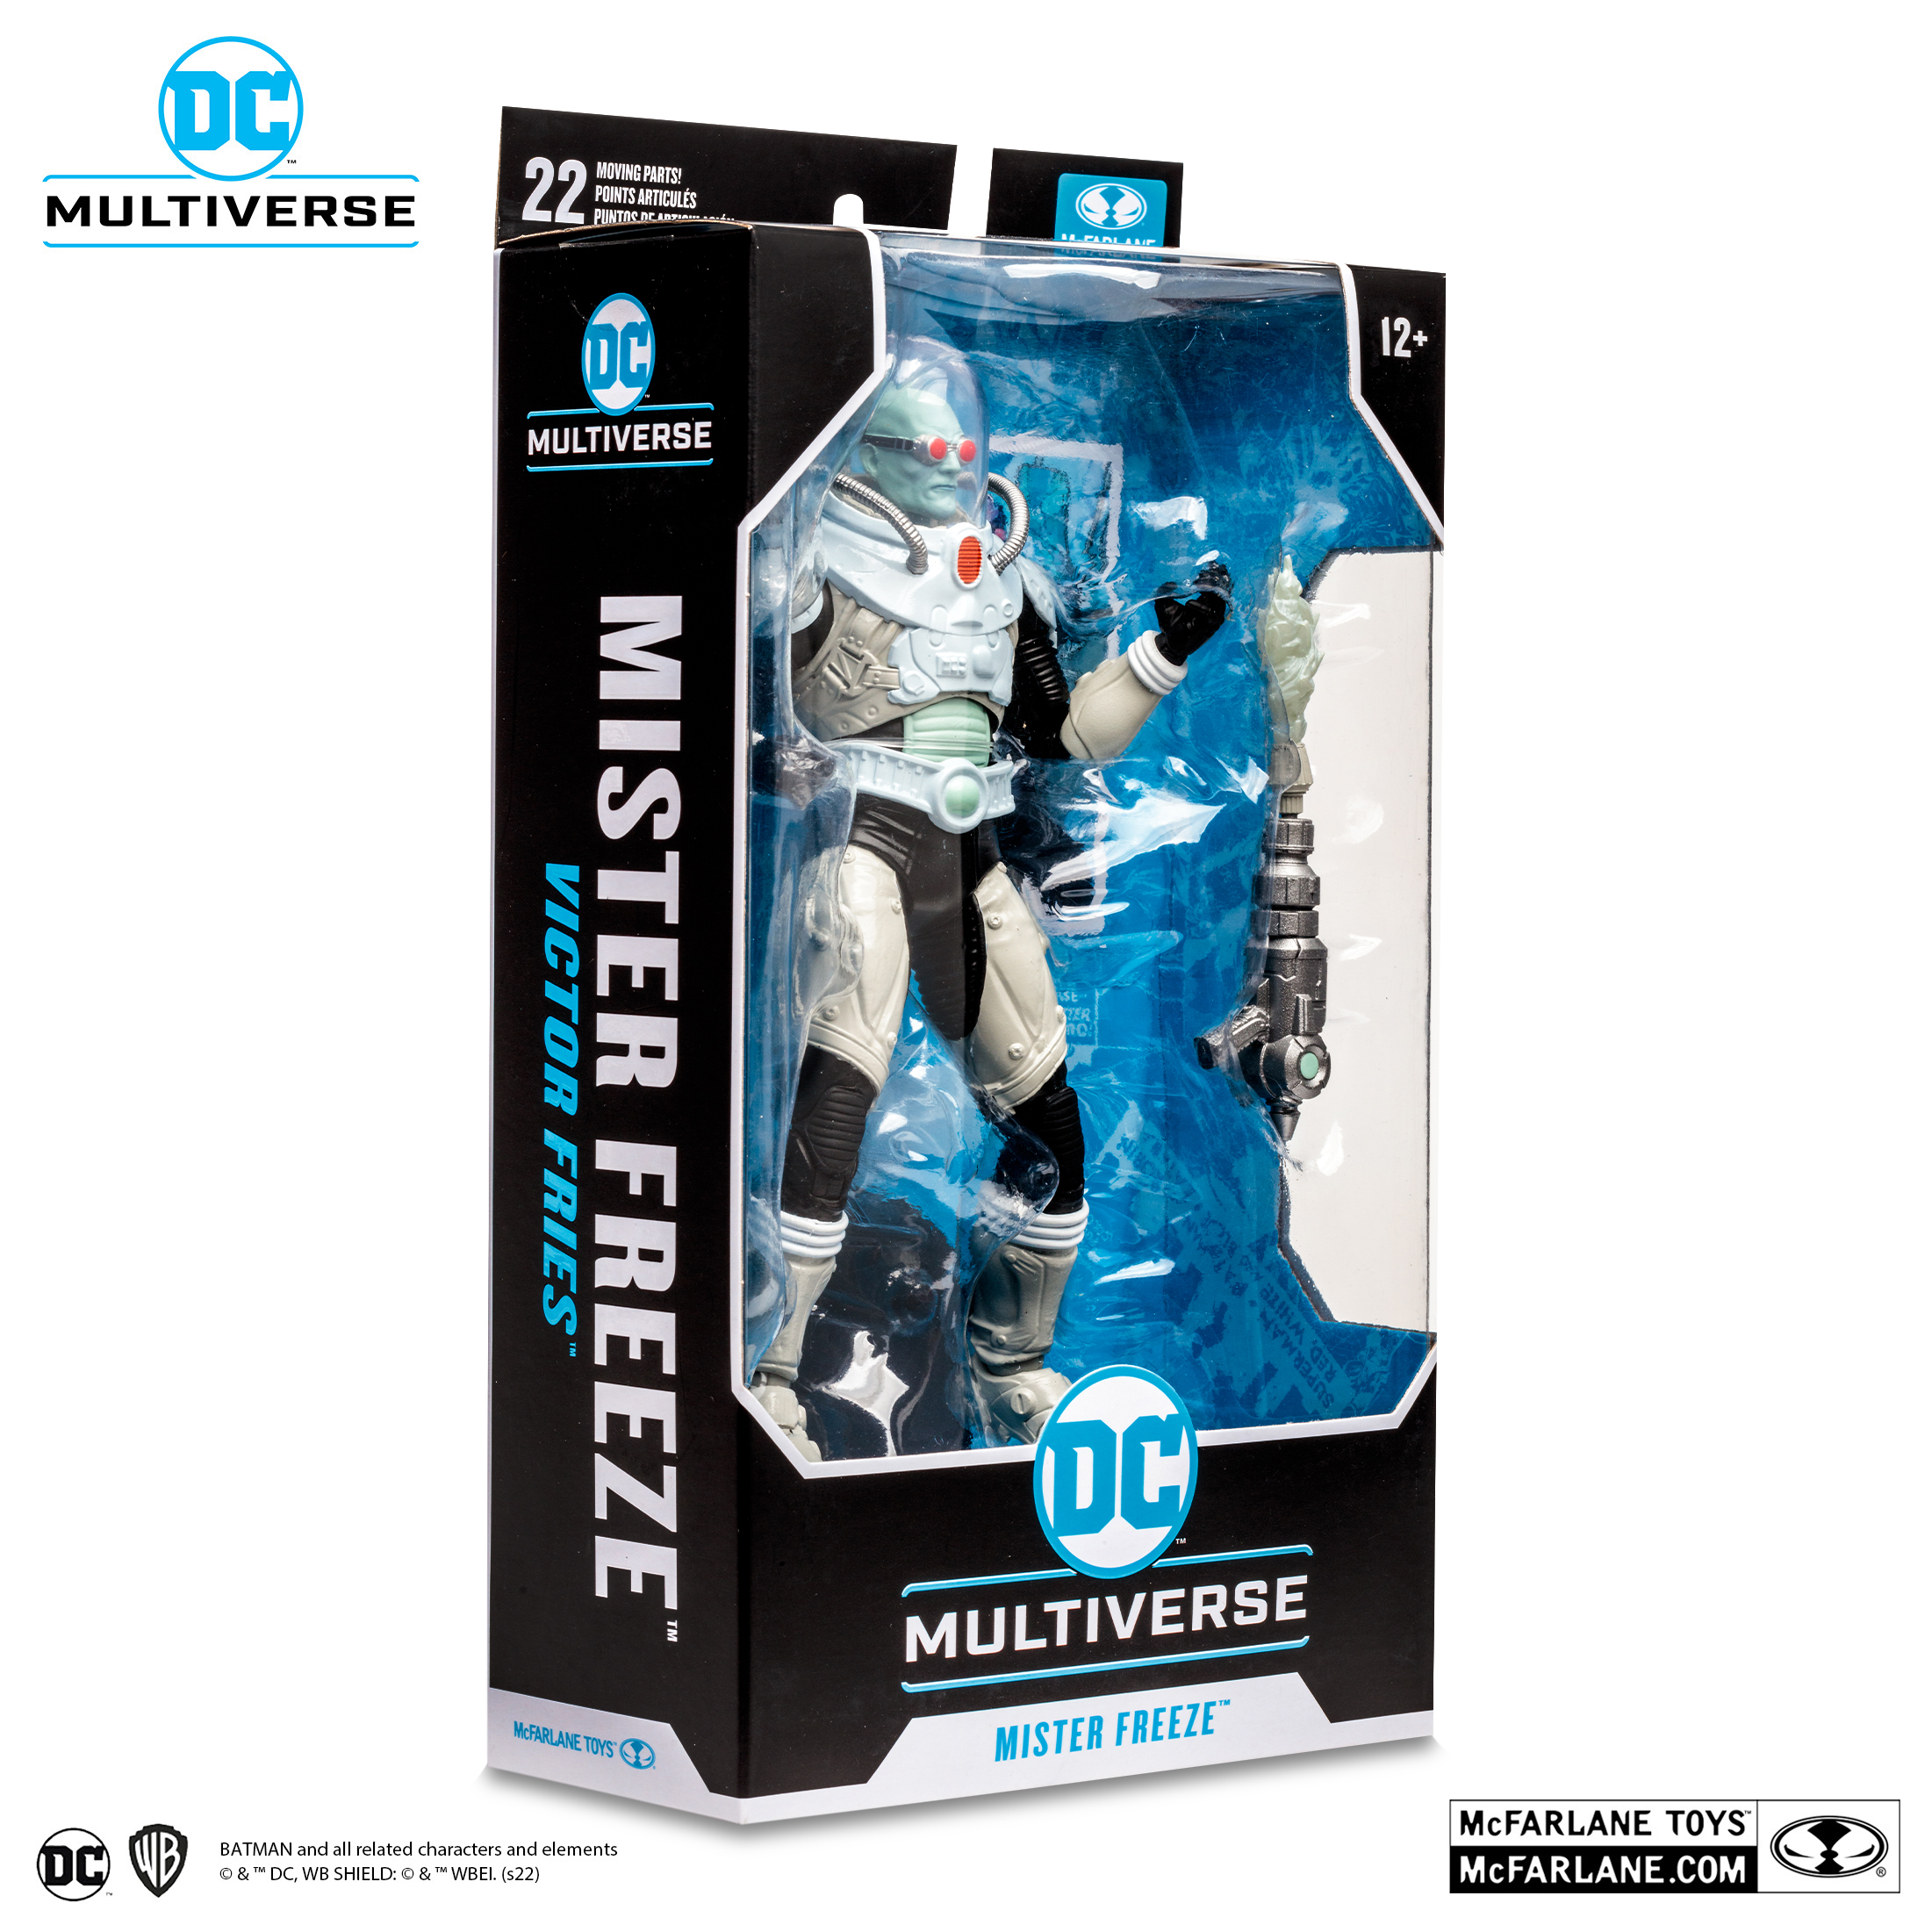 DC on X: FREEZE! Victor Fries as Mister Freeze makes his McFarlane Toys  debut. Available for pre-order now. ➡️   #MisterFreeze #VictorFries  / X